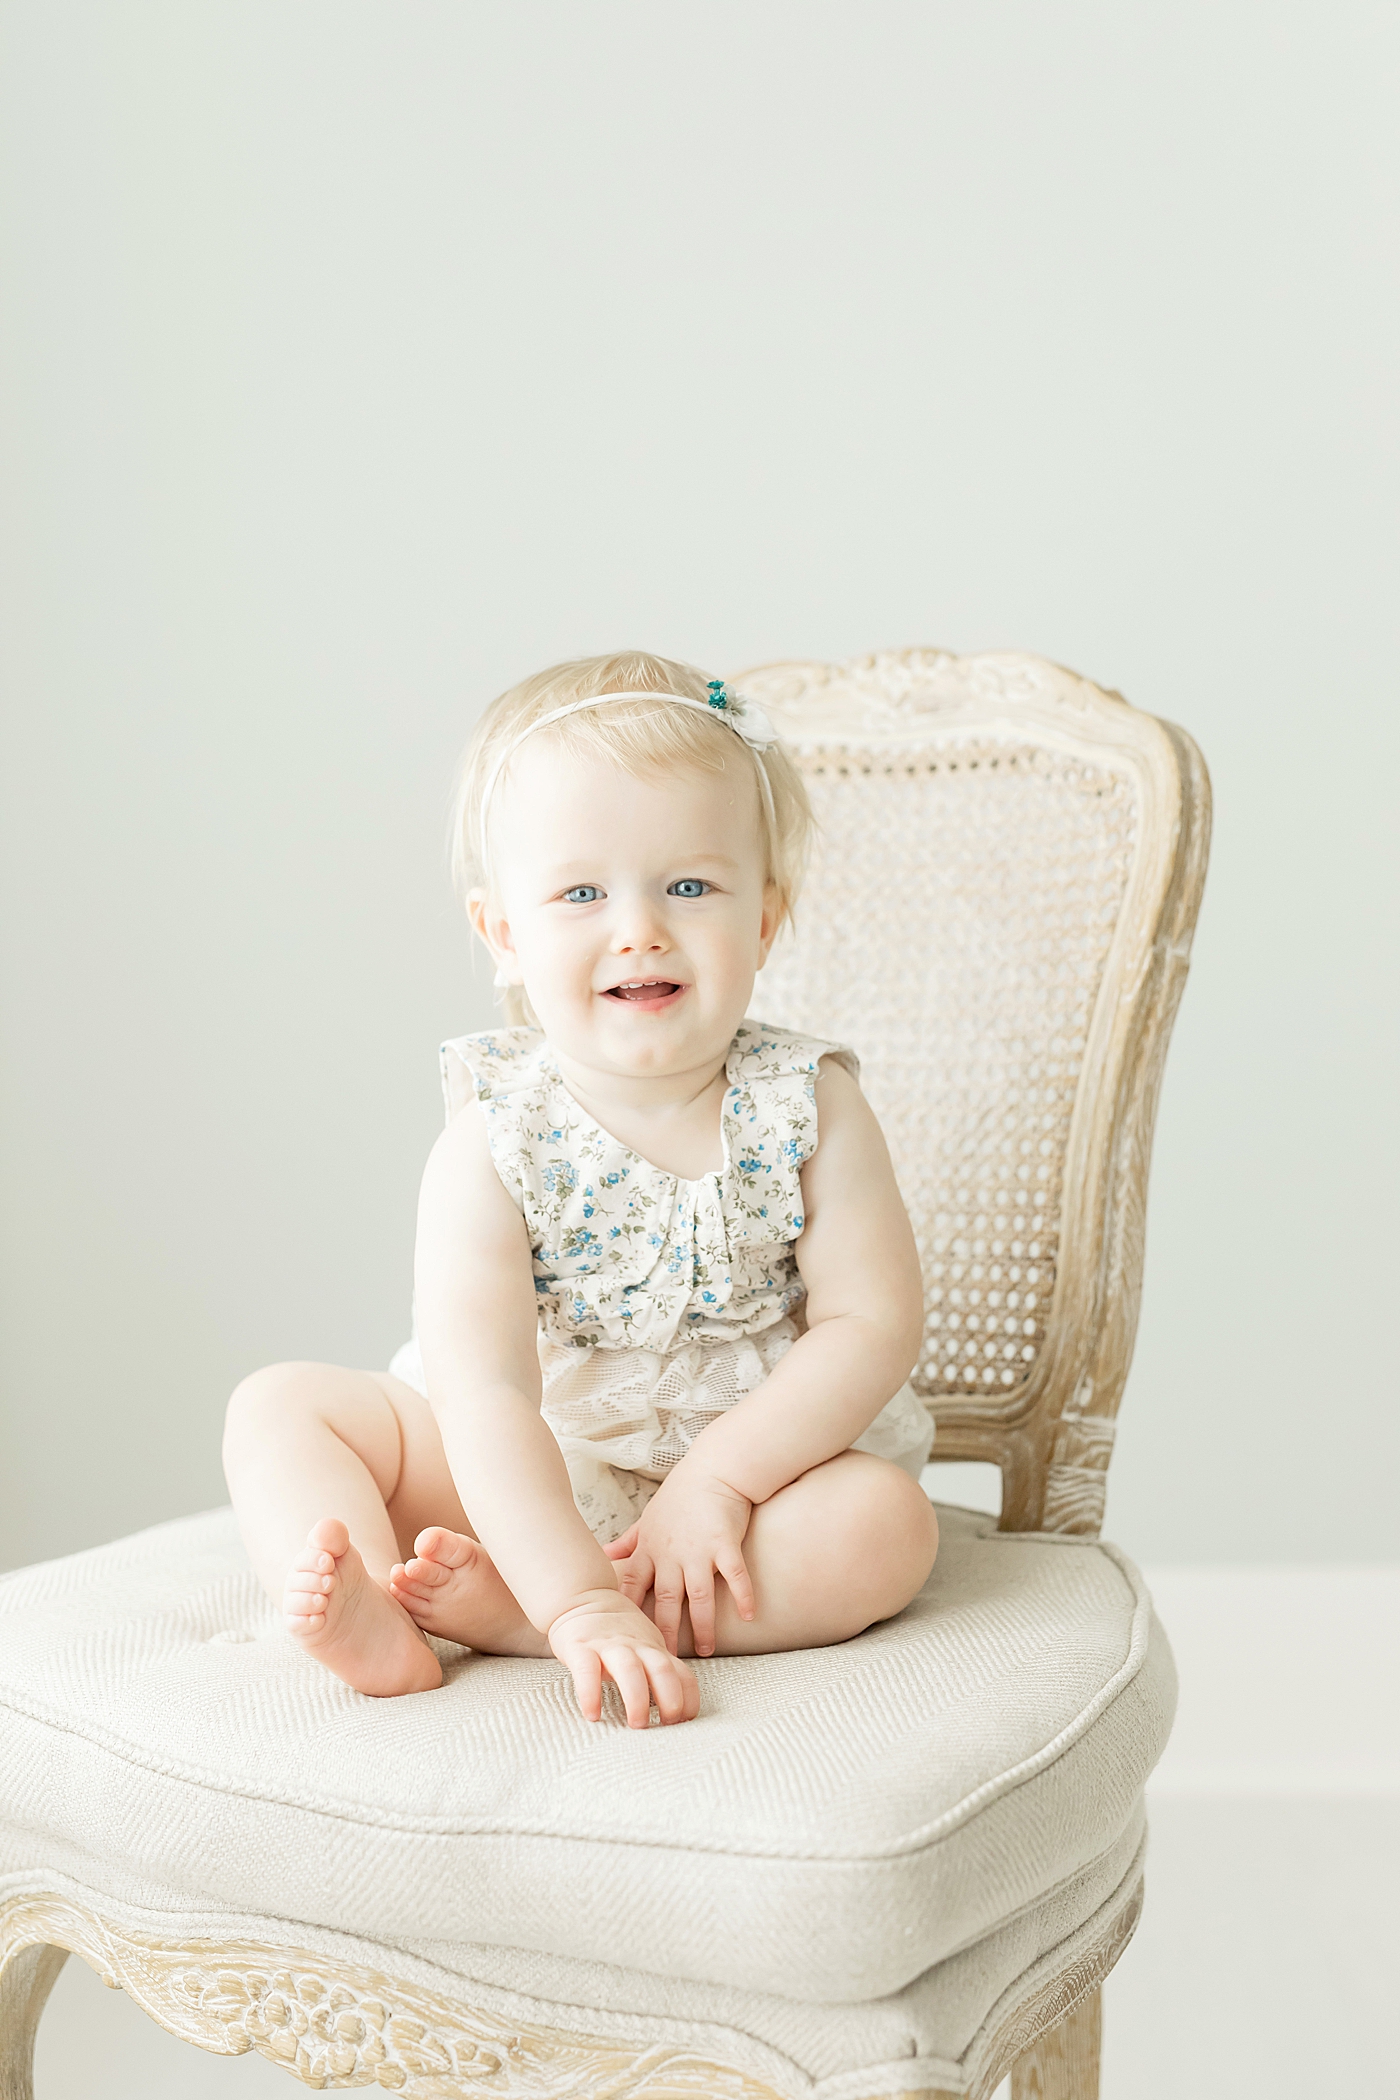 Baby girl sitting on a beautiful chair. Photo by Fresh Light Photography.